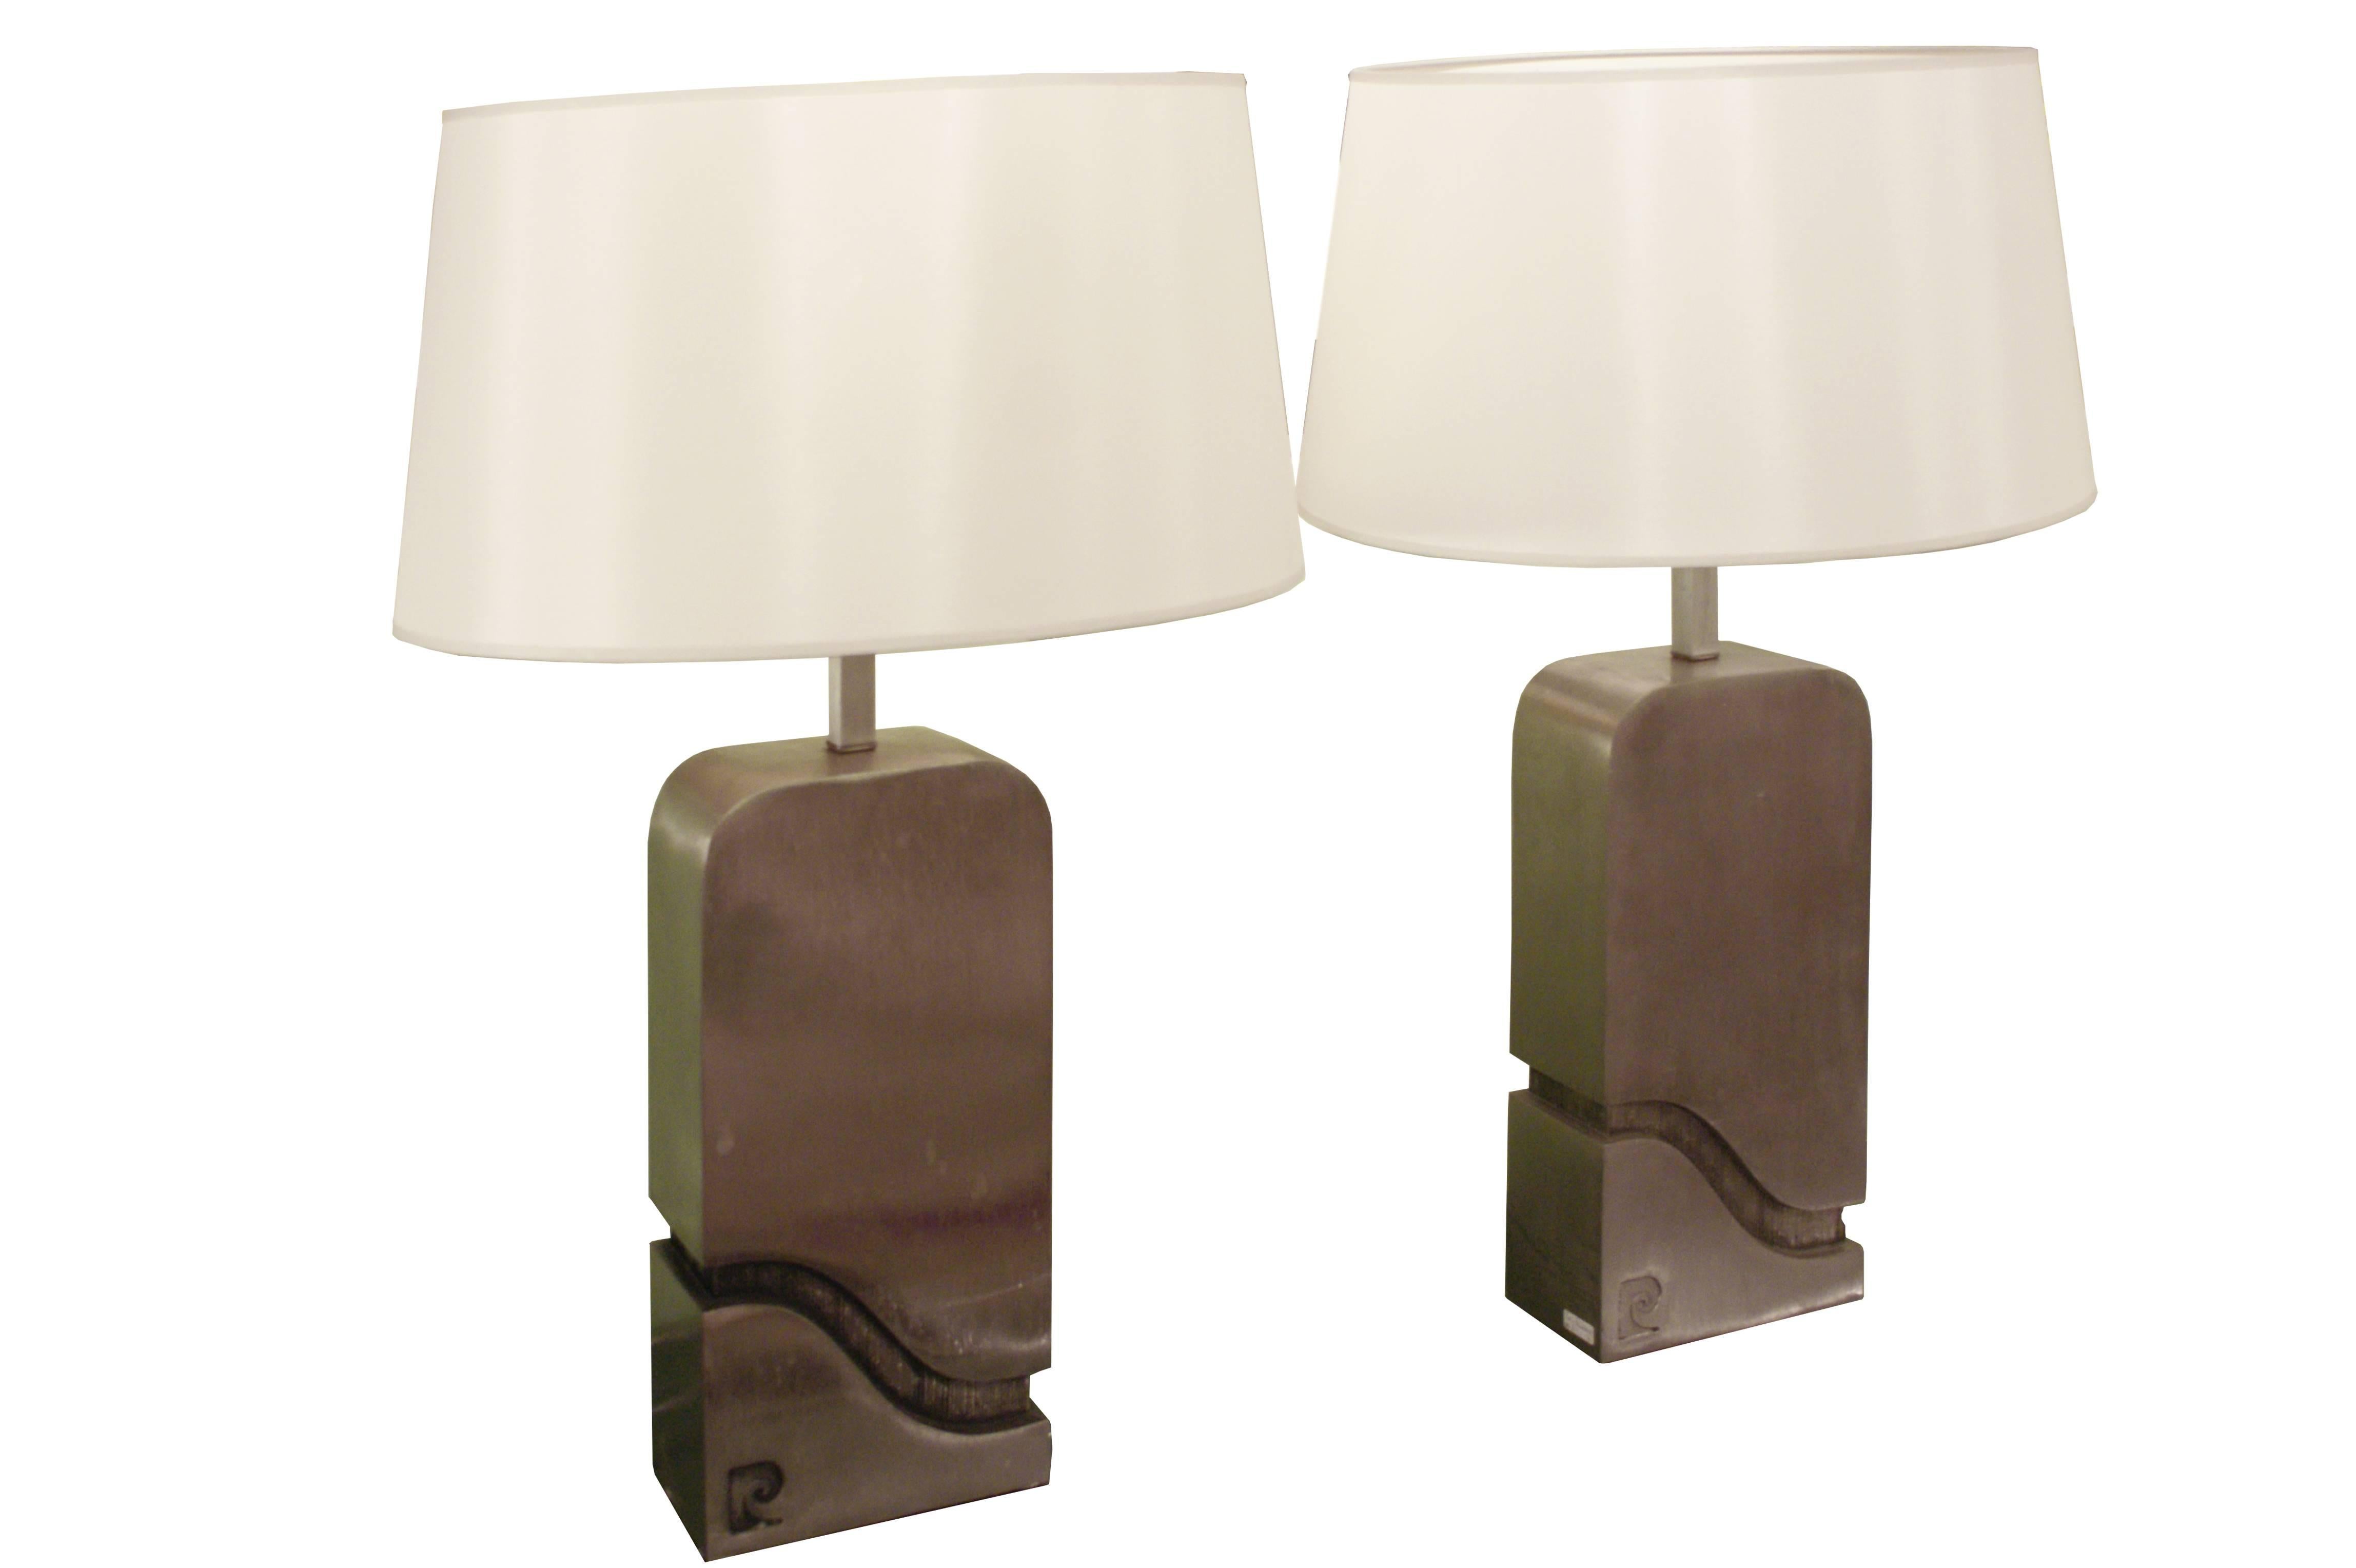 Pierre Cardin, Pair of Mid-Century Modern French Iron Table Lamp, 1970 For Sale 4